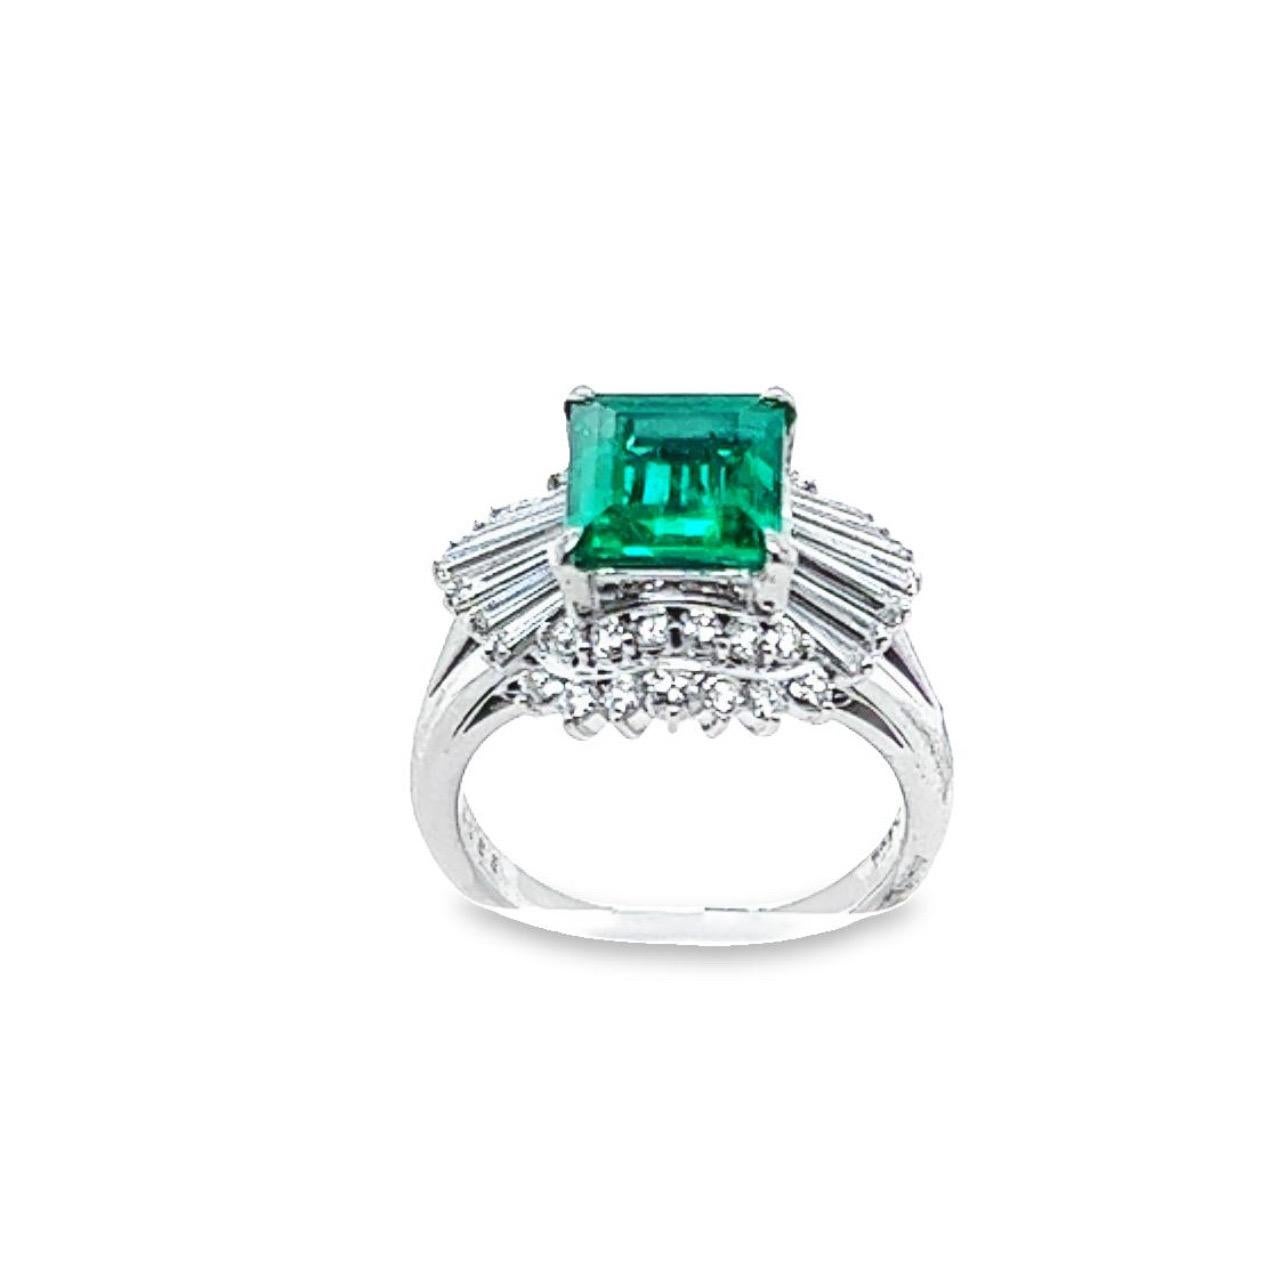 GIA Certified Colombian Emerald and diamond ballerina-style cocktail ring crafted in platinum.  The center stone is a square-shaped vibrant green emerald weighing 2.07 carats. 1.18 carats of mixed shape, G/H color, and VS clarity diamonds surround